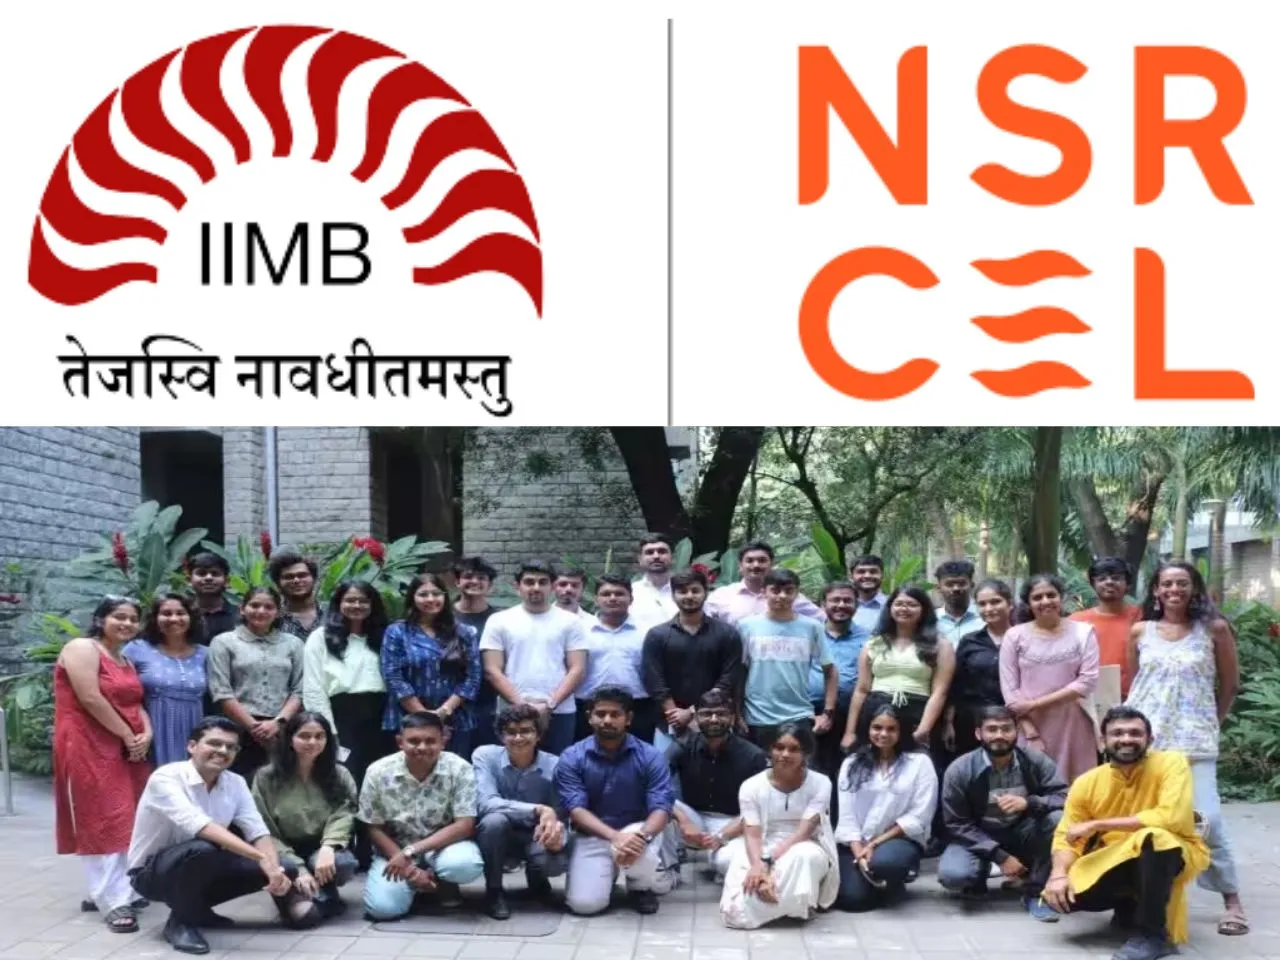 NSRCEL-IIMB Launches Campus Founders to Nurture Student Entrepreneurs